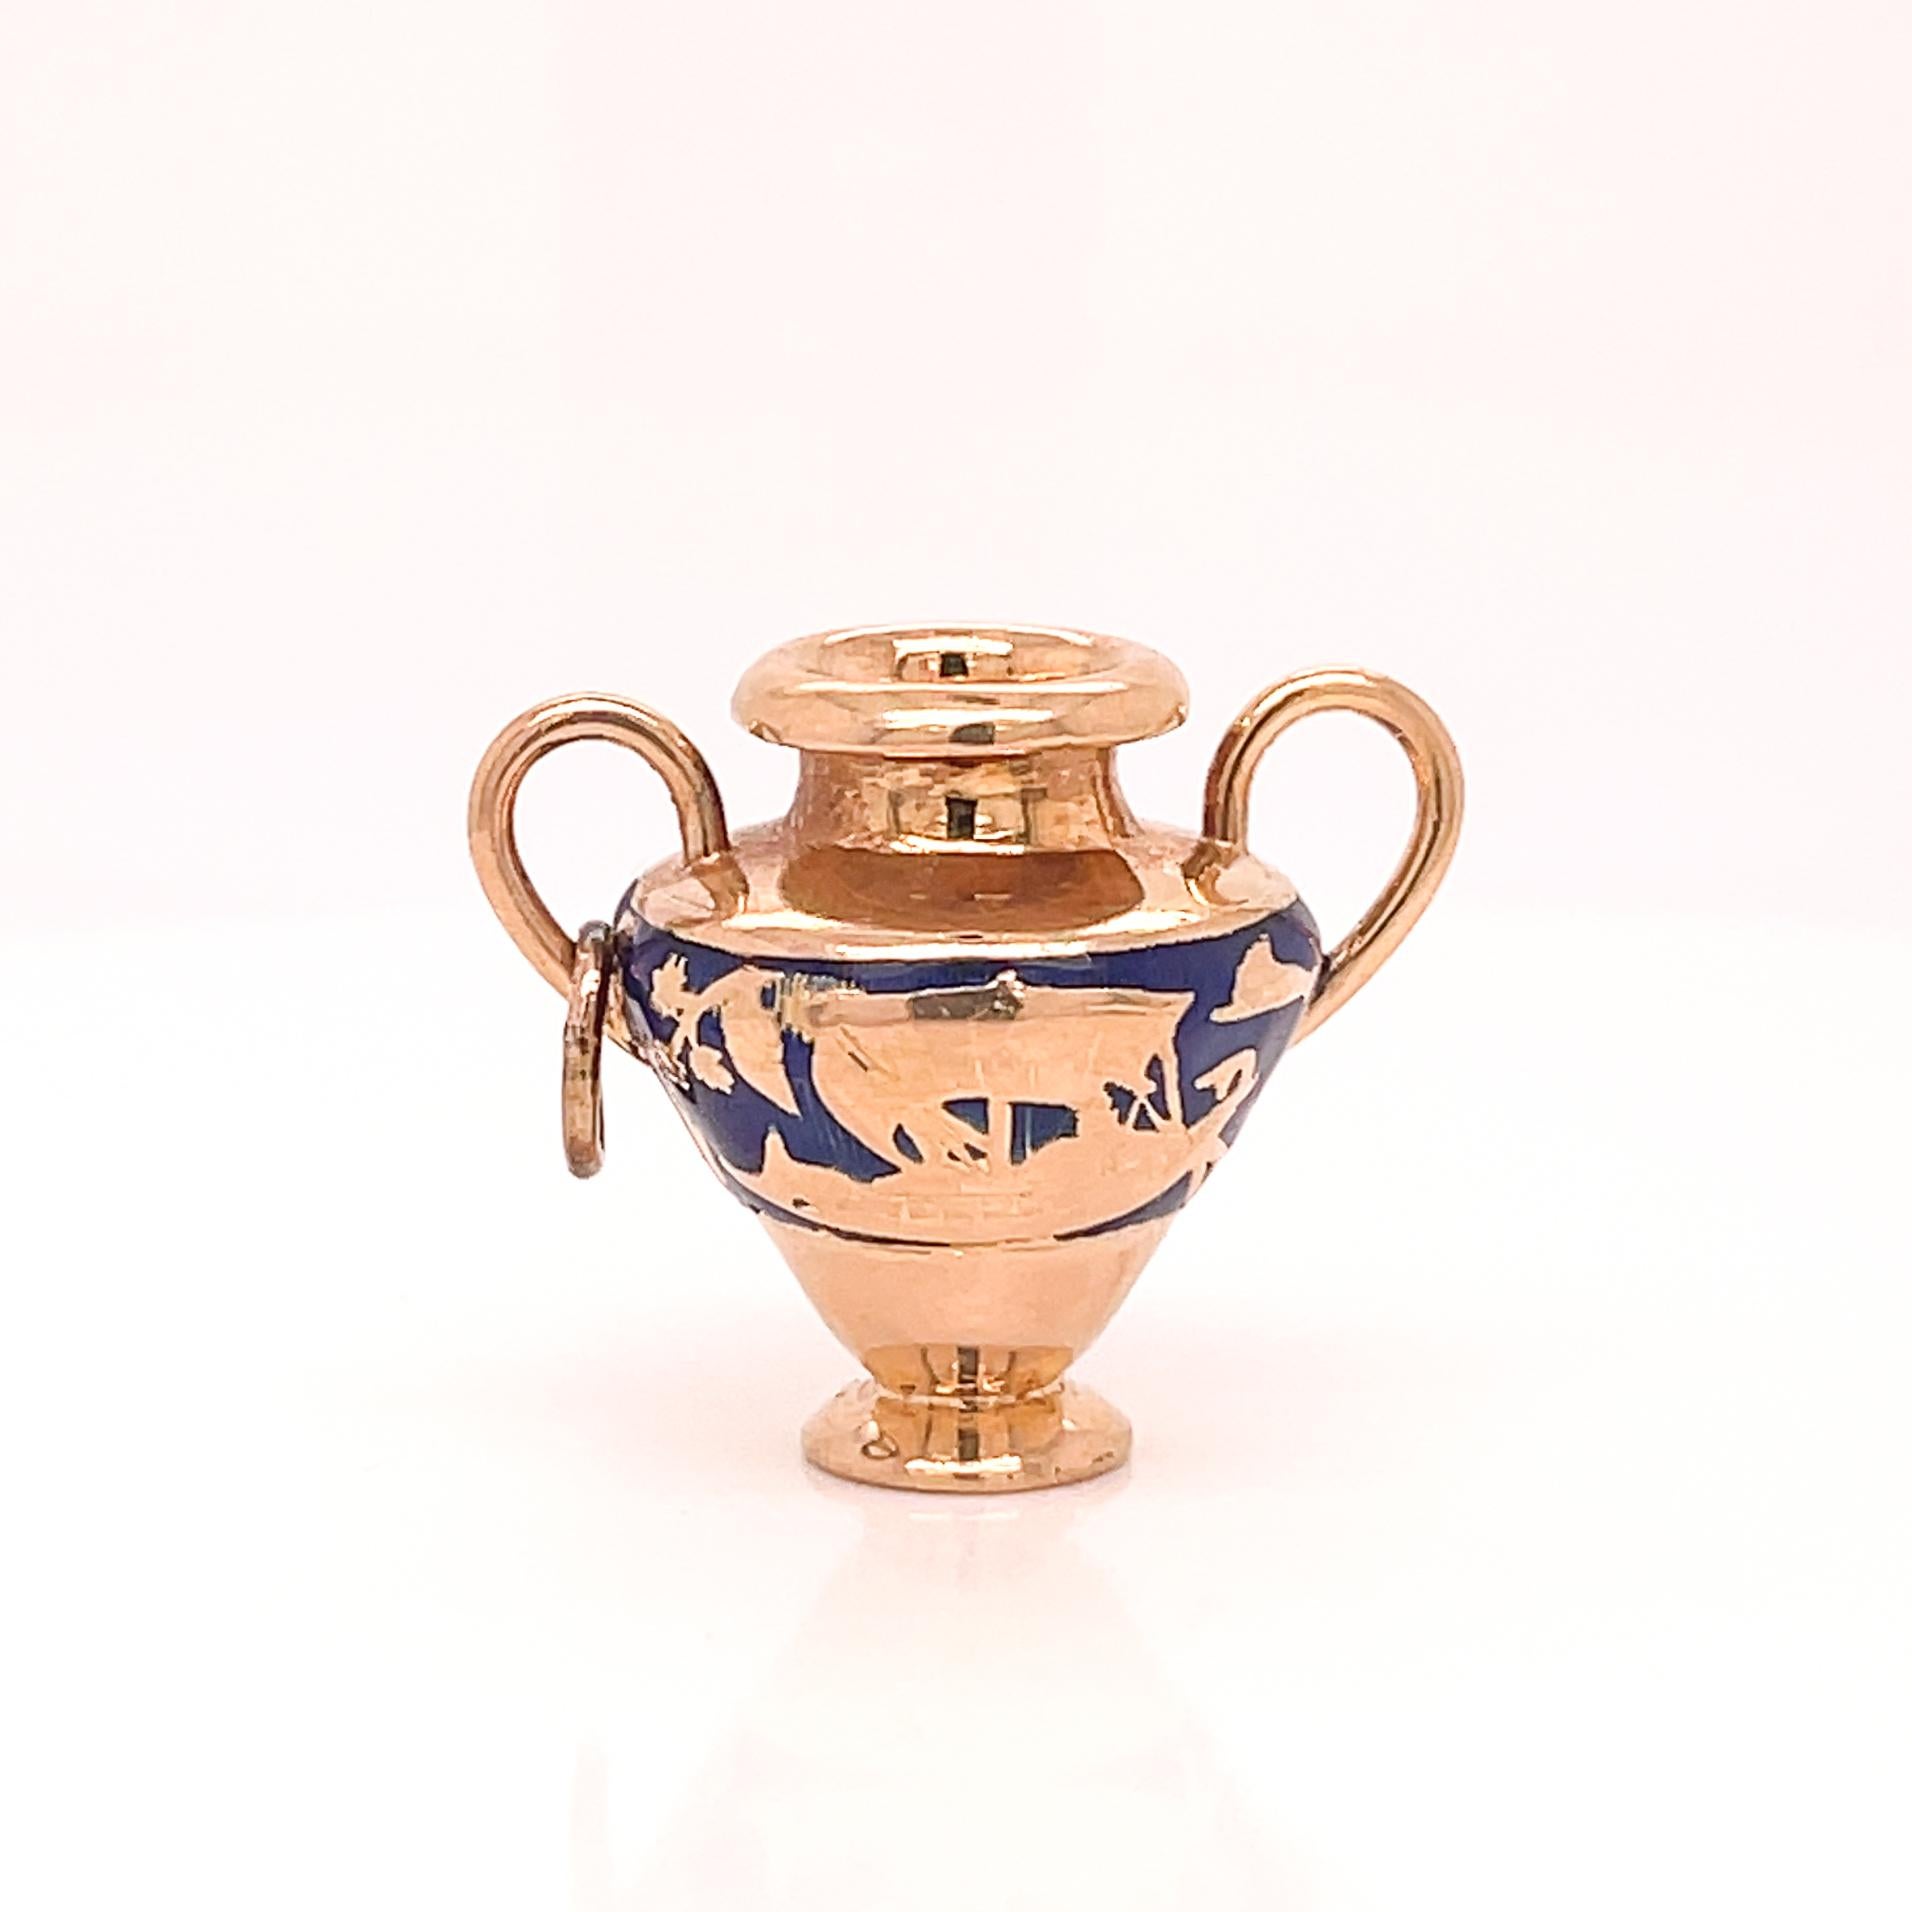 A very fine gold vase shaped charm or pendant.

With images of a ship and two greek soldiers in battle engraved around the vase and embellished with blue enamel.

Simply a great charm!

Date:
20th Century

Overall Condition:
It is in overall good,